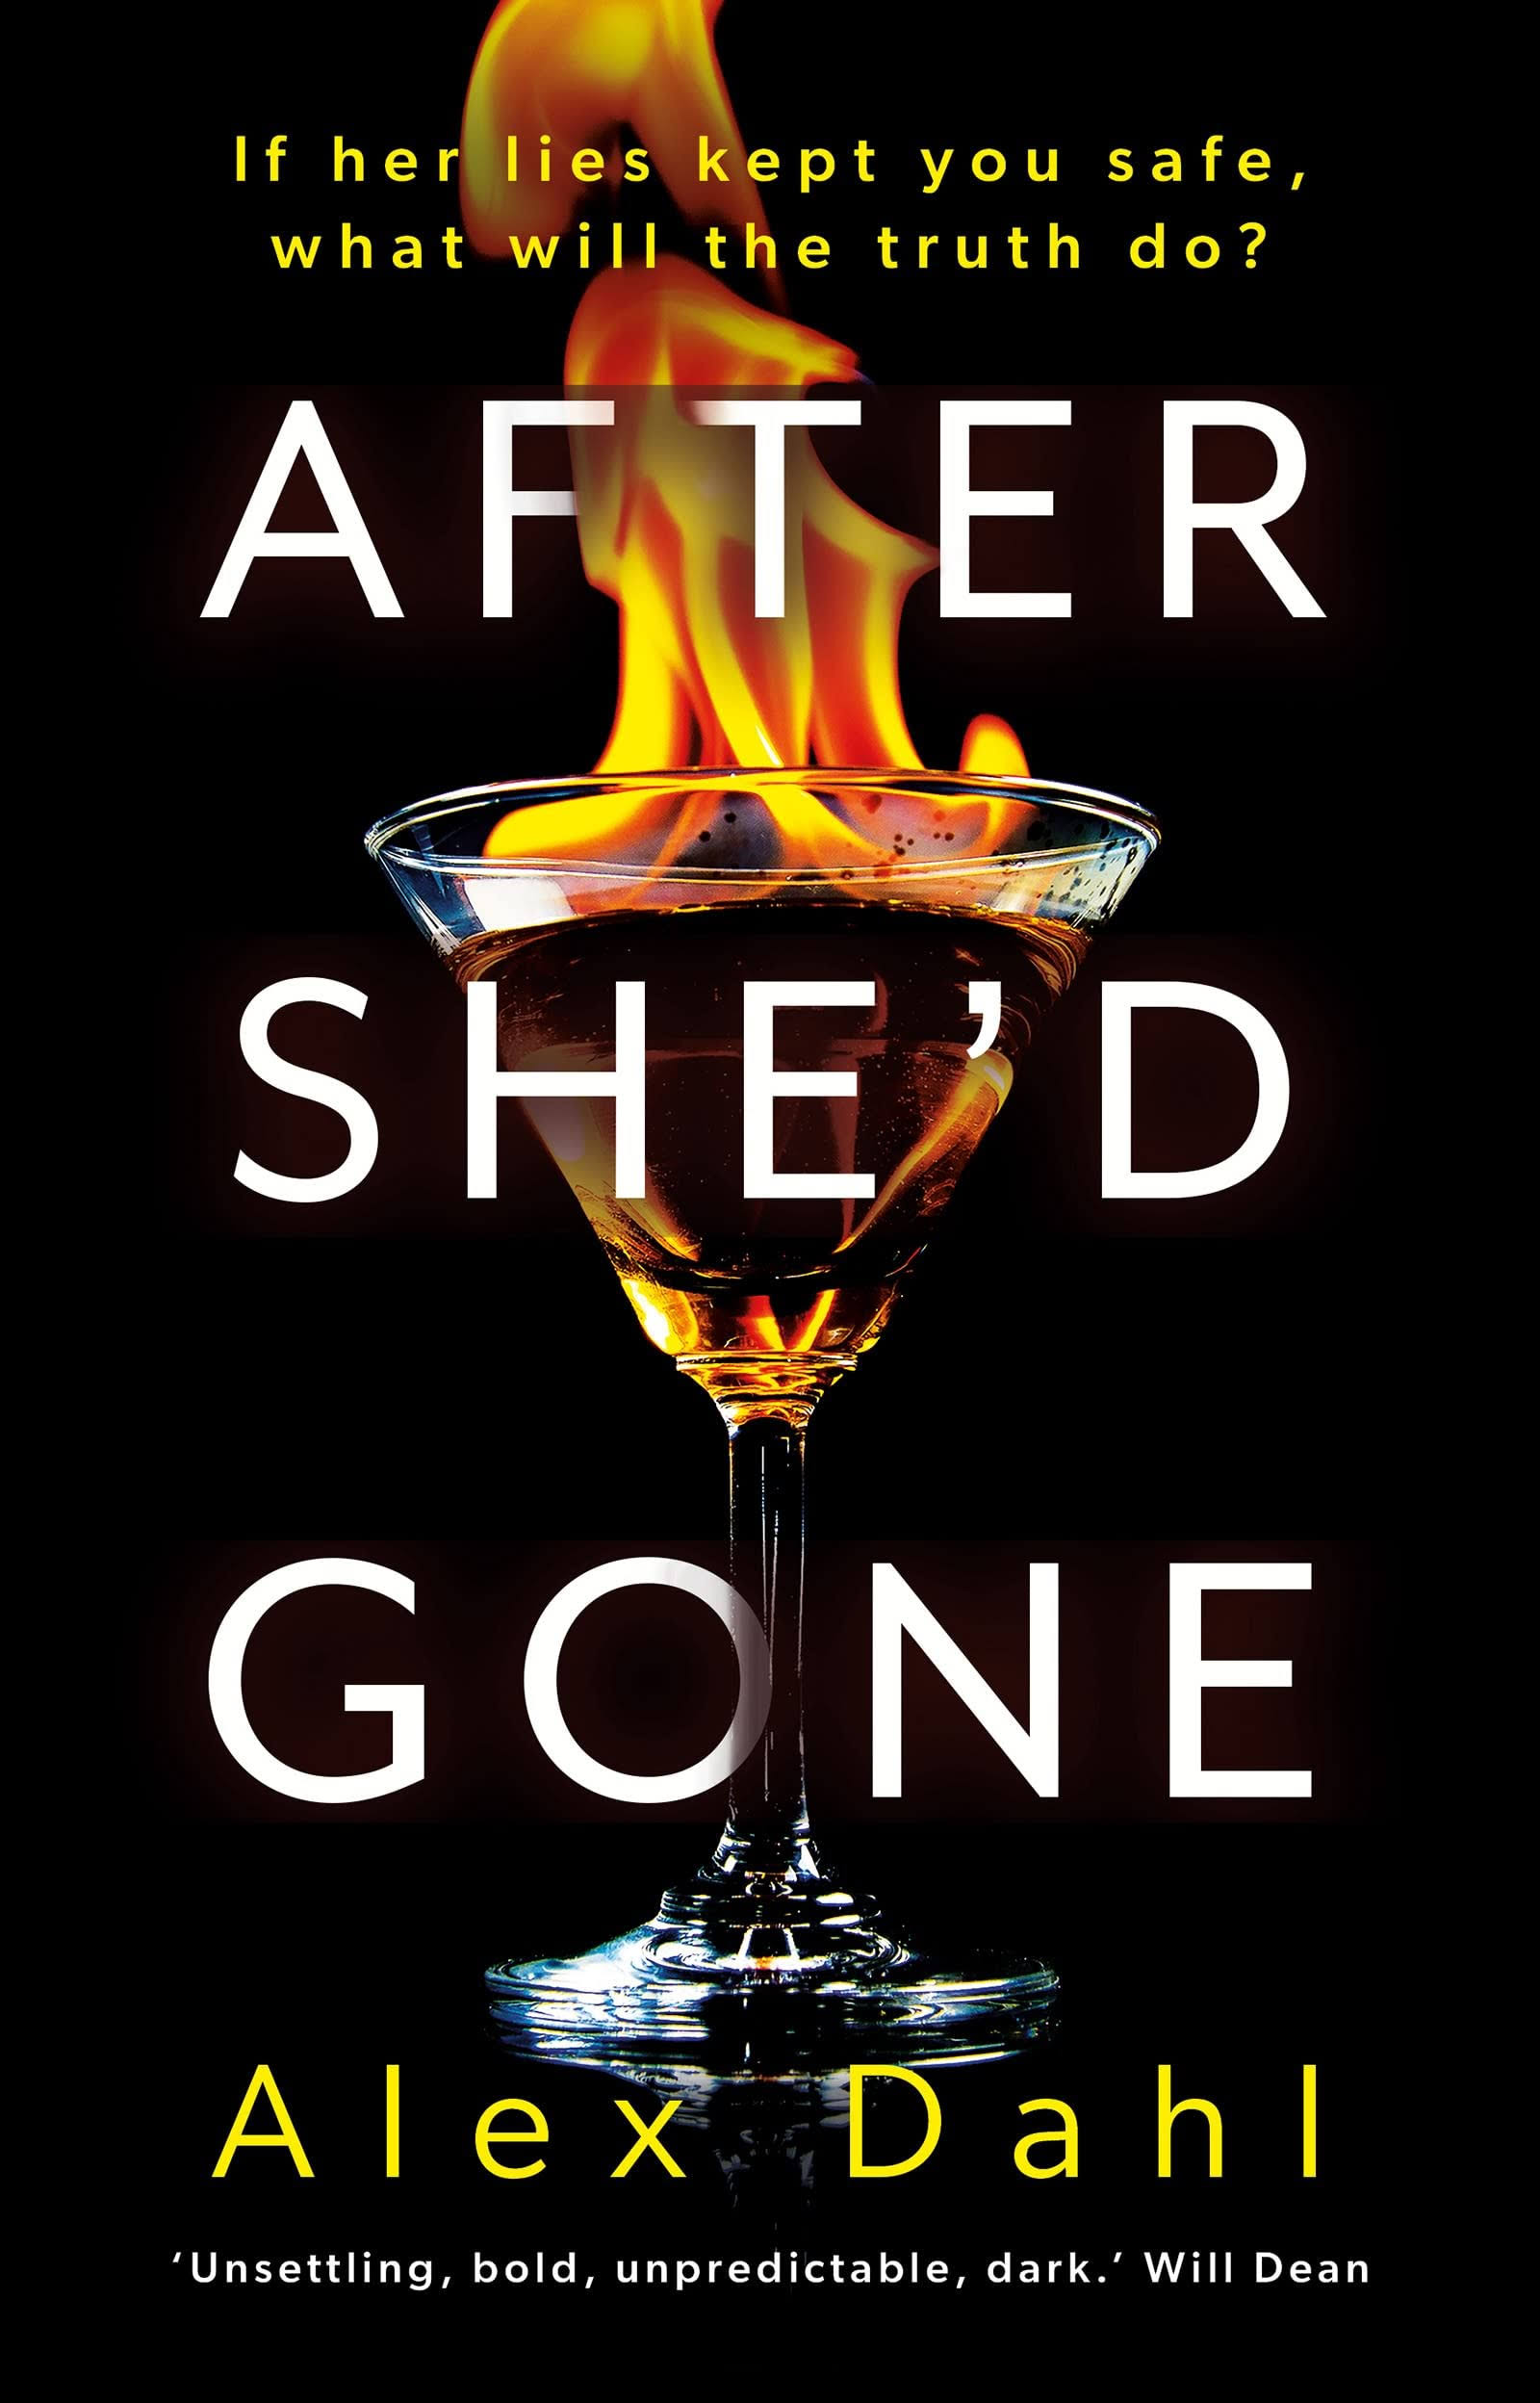 After She'd Gone [Book]